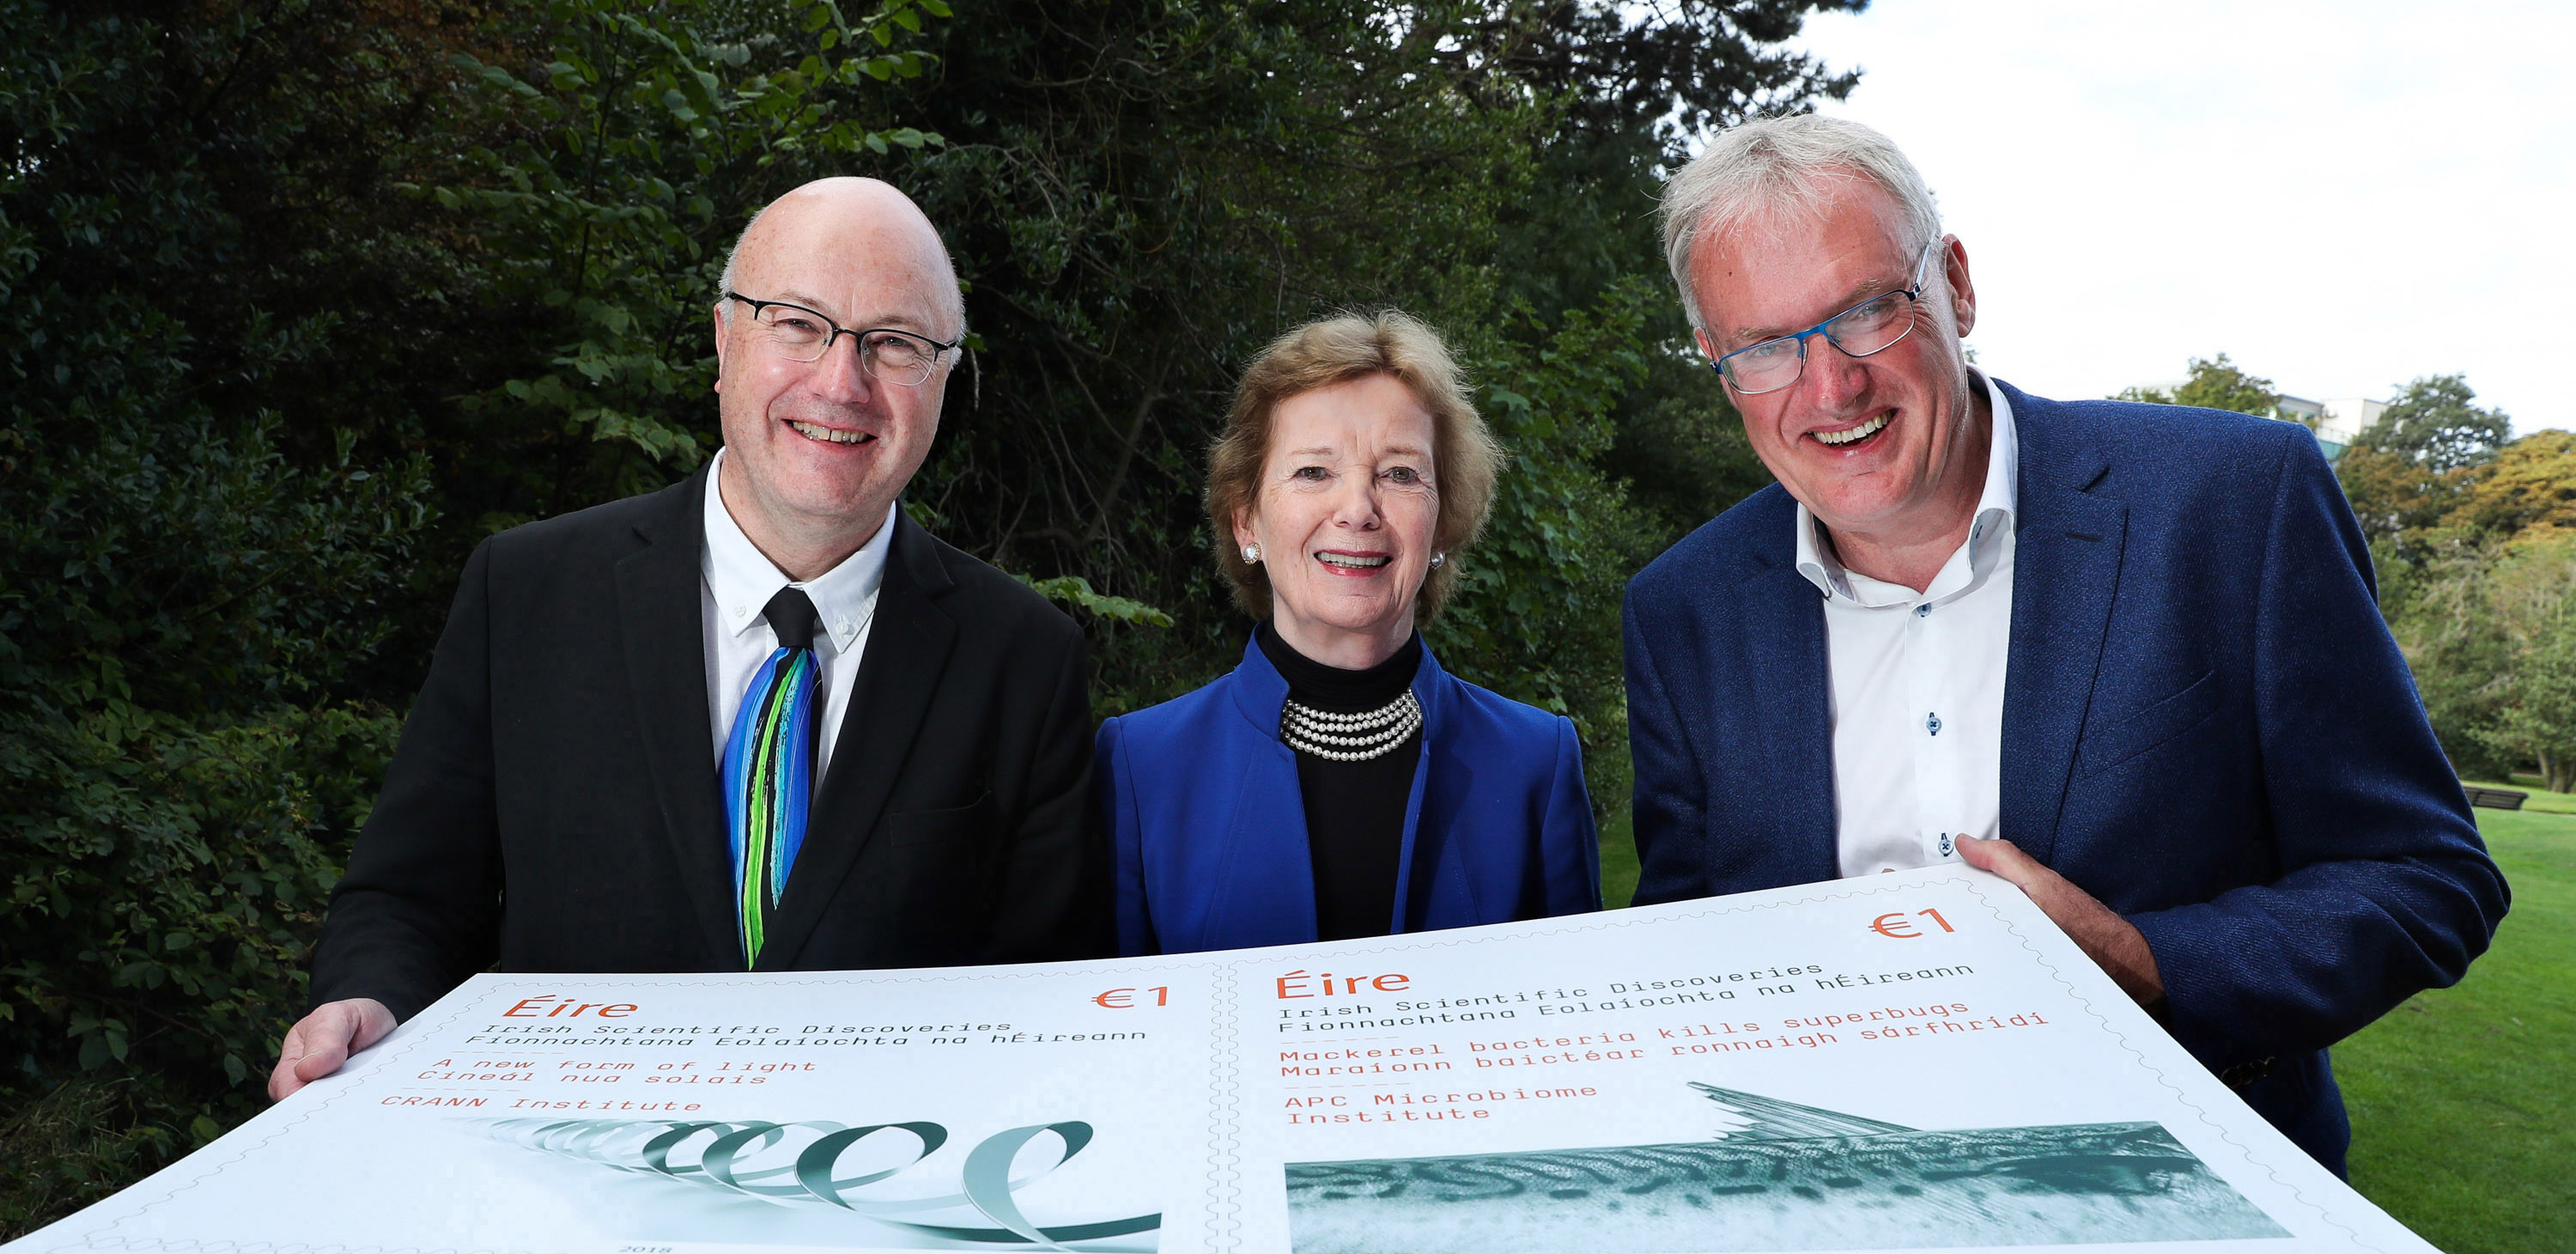 UCC research centres put their stamp on An Post series